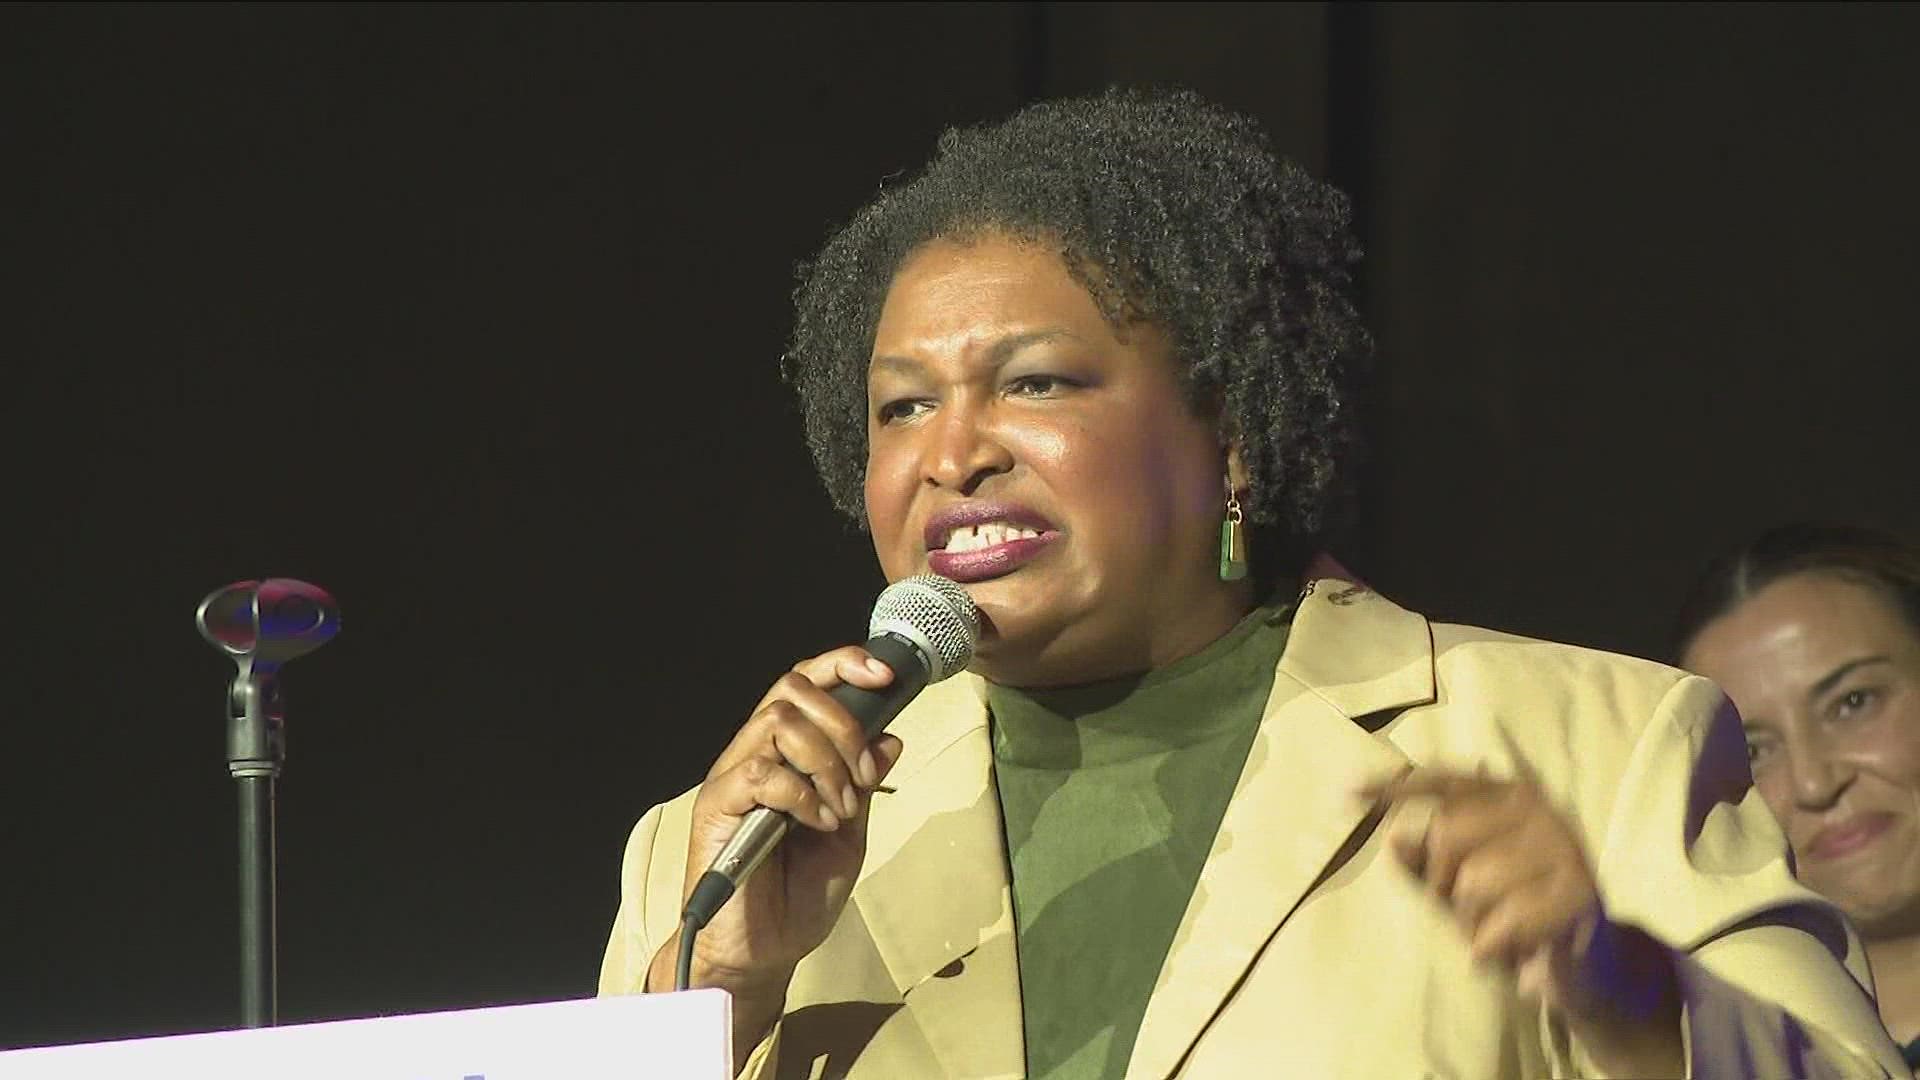 Abrams told the crowd she wants to move Georgia forward, and she focused on the issues of education, healthcare, and the economy.